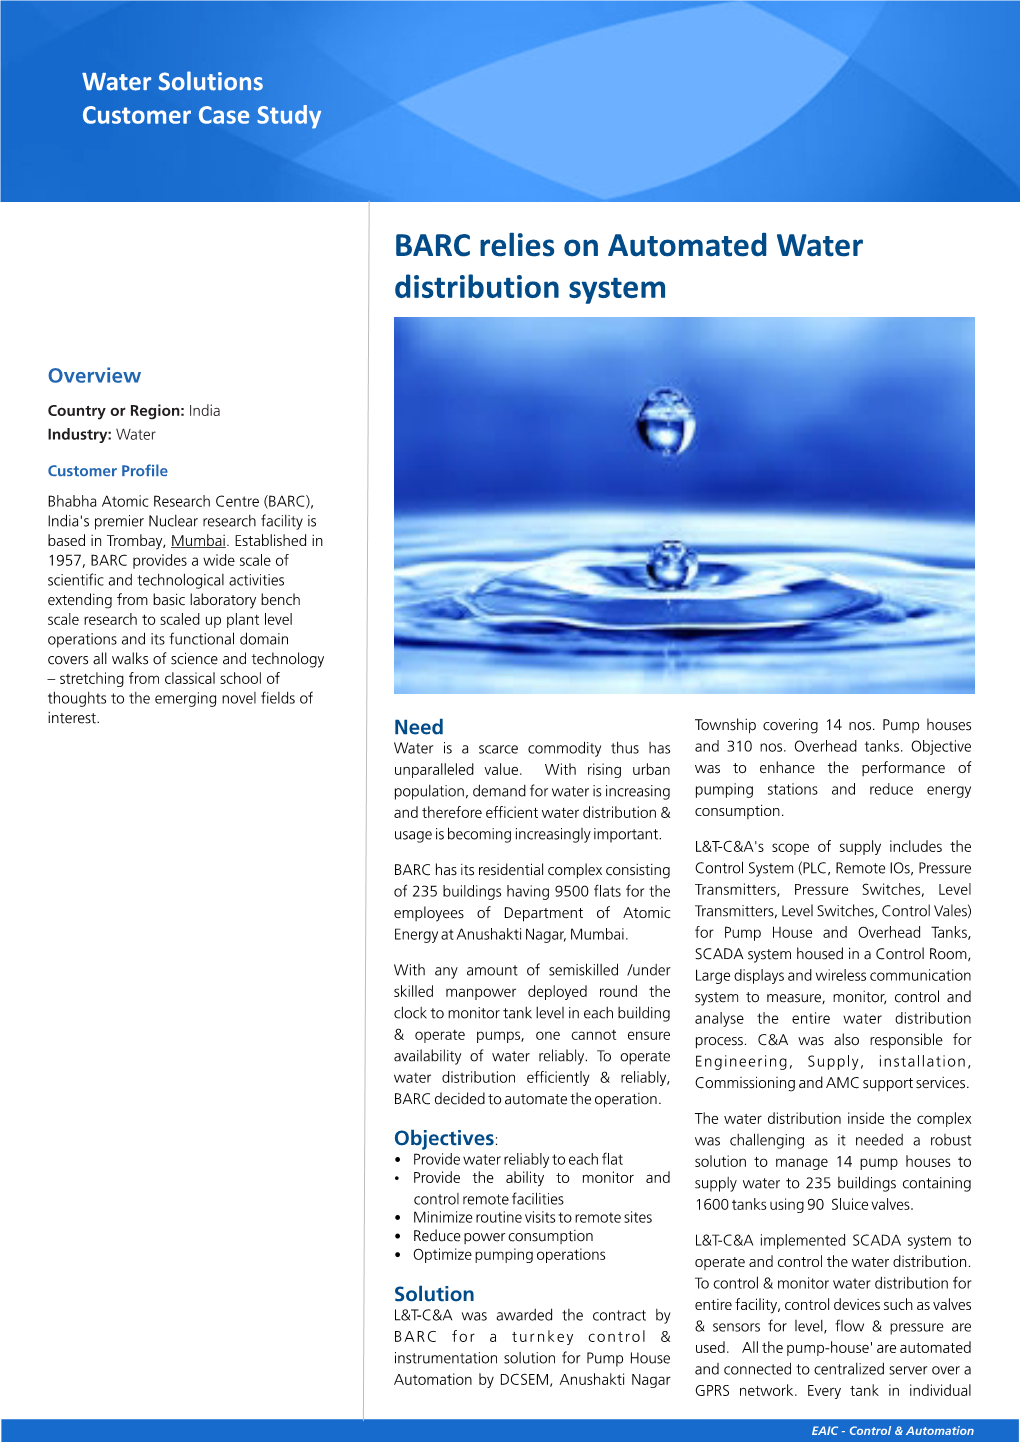 BARC Relies on Automated Water Distribution System